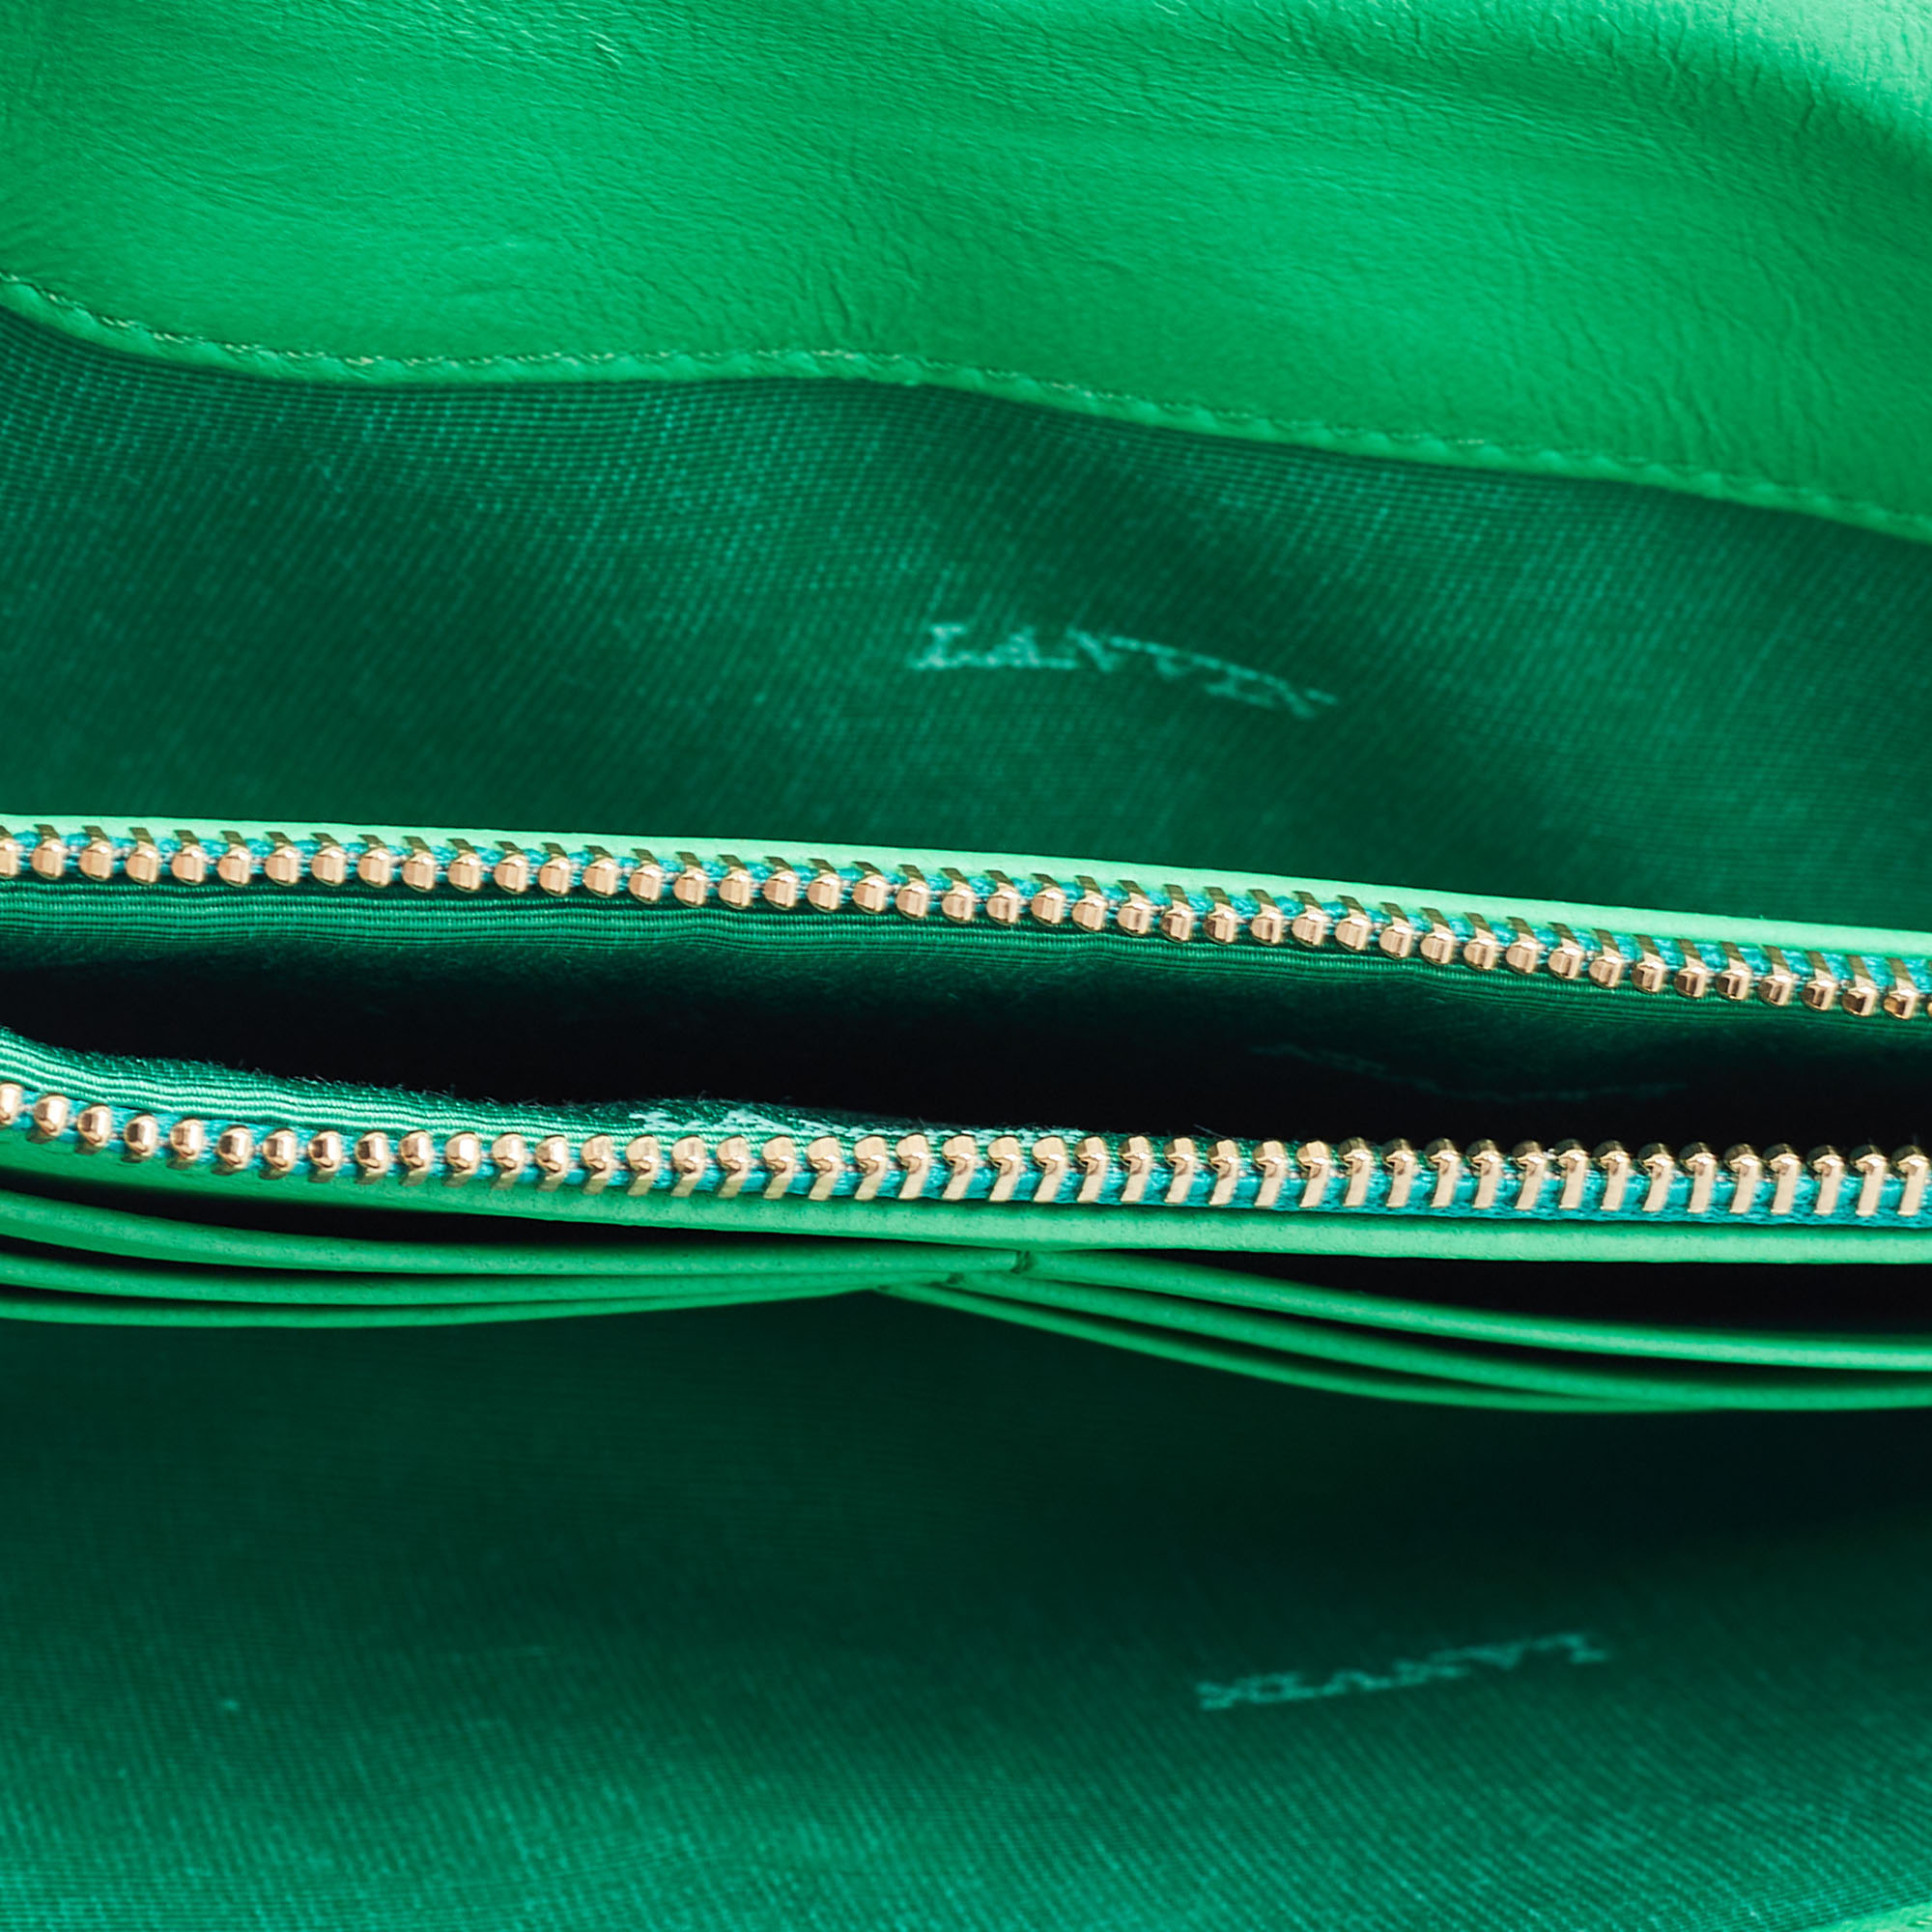 Lanvin Green Leather Flap Chain Clutch